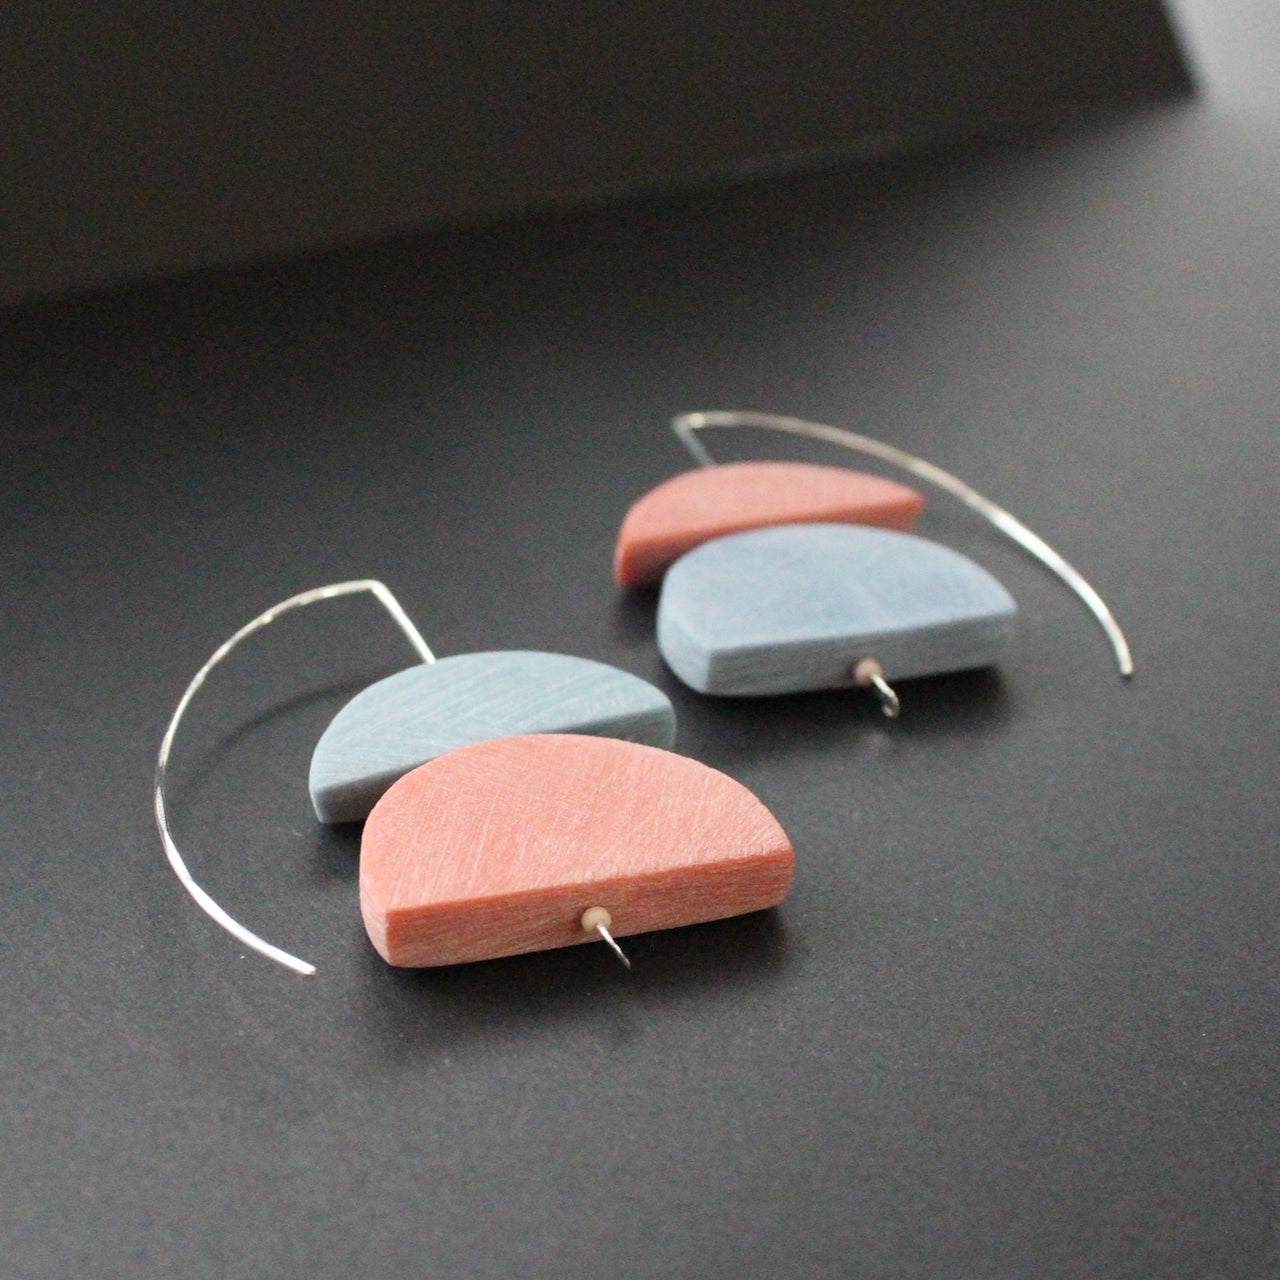 Drop earrings with Indigo and Rouge Ercolano by artist Clare Lloyd.